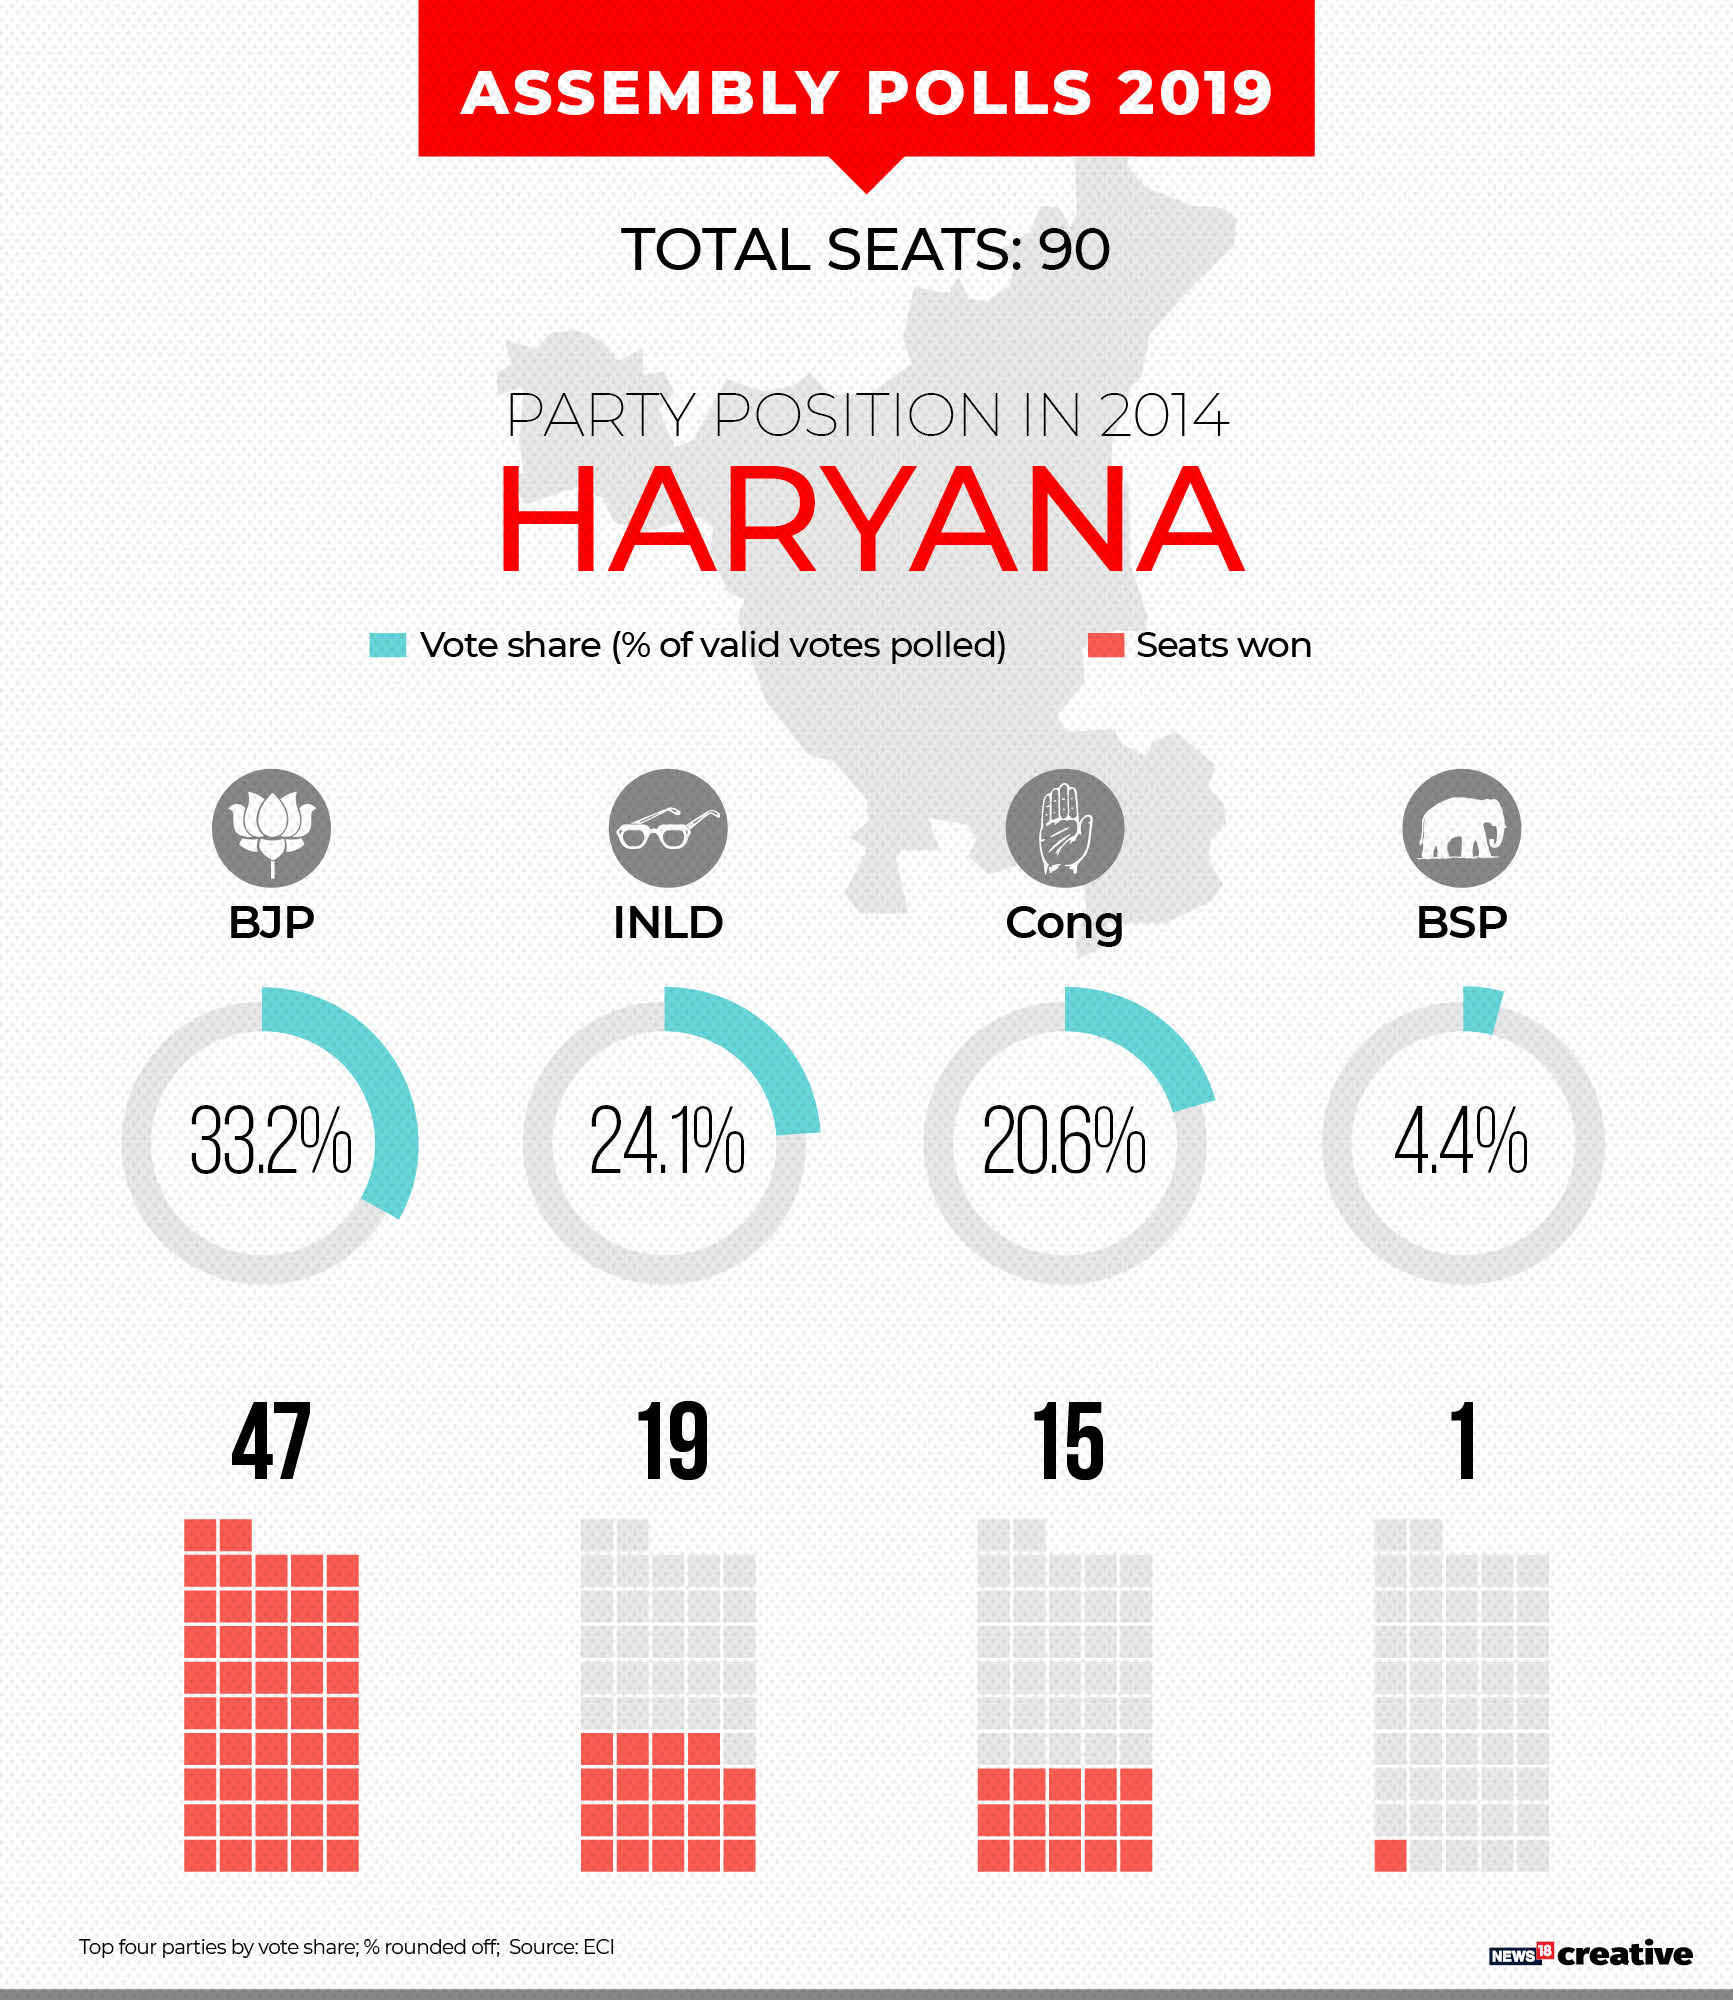 Haryana elections highlights: 65% voter turnout till 6pm, News18 Ipsos exit poll predicts 75 seats for BJP, Congress to get just 10